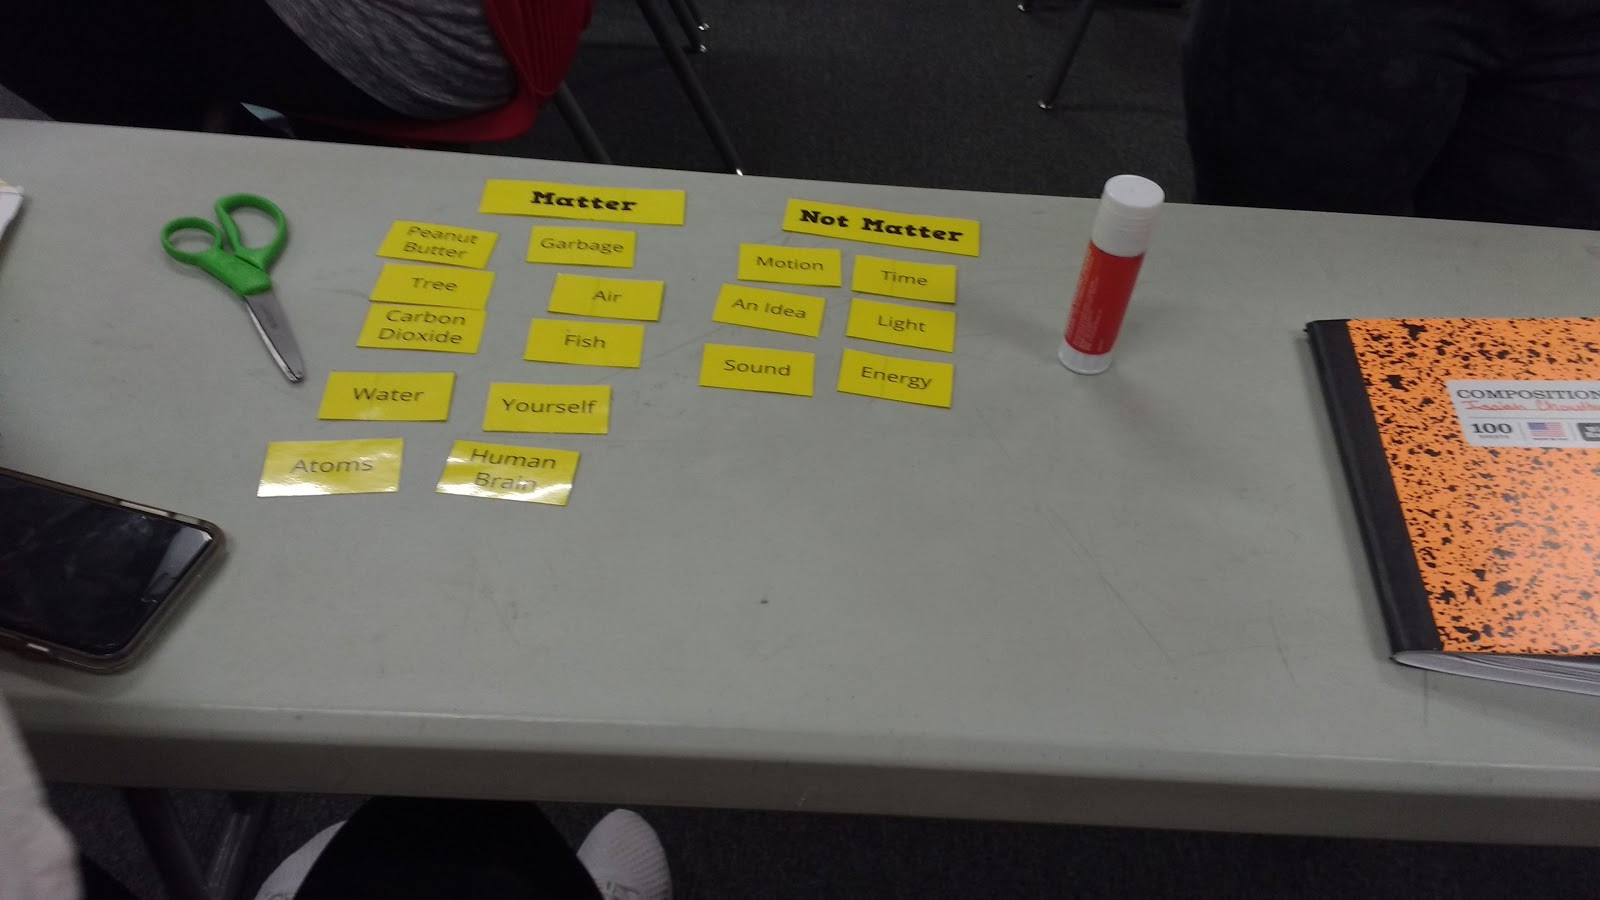 matter vs not matter card sort activity for chemistry or physical science classes